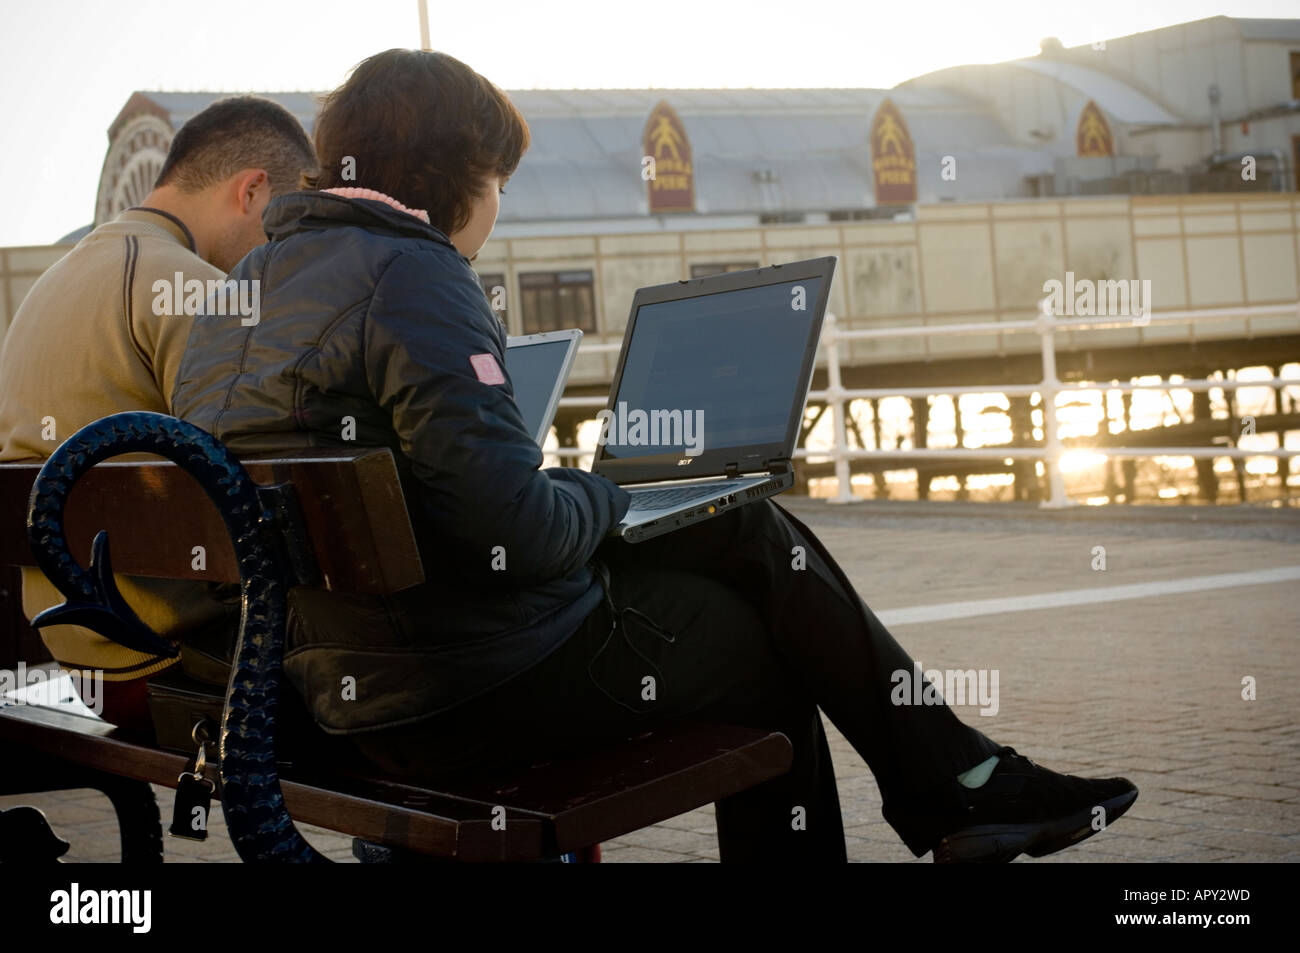 two polish young people using laptops to access wireless network Aberystwyth promenade to call home on Skype and send e-mail Stock Photo